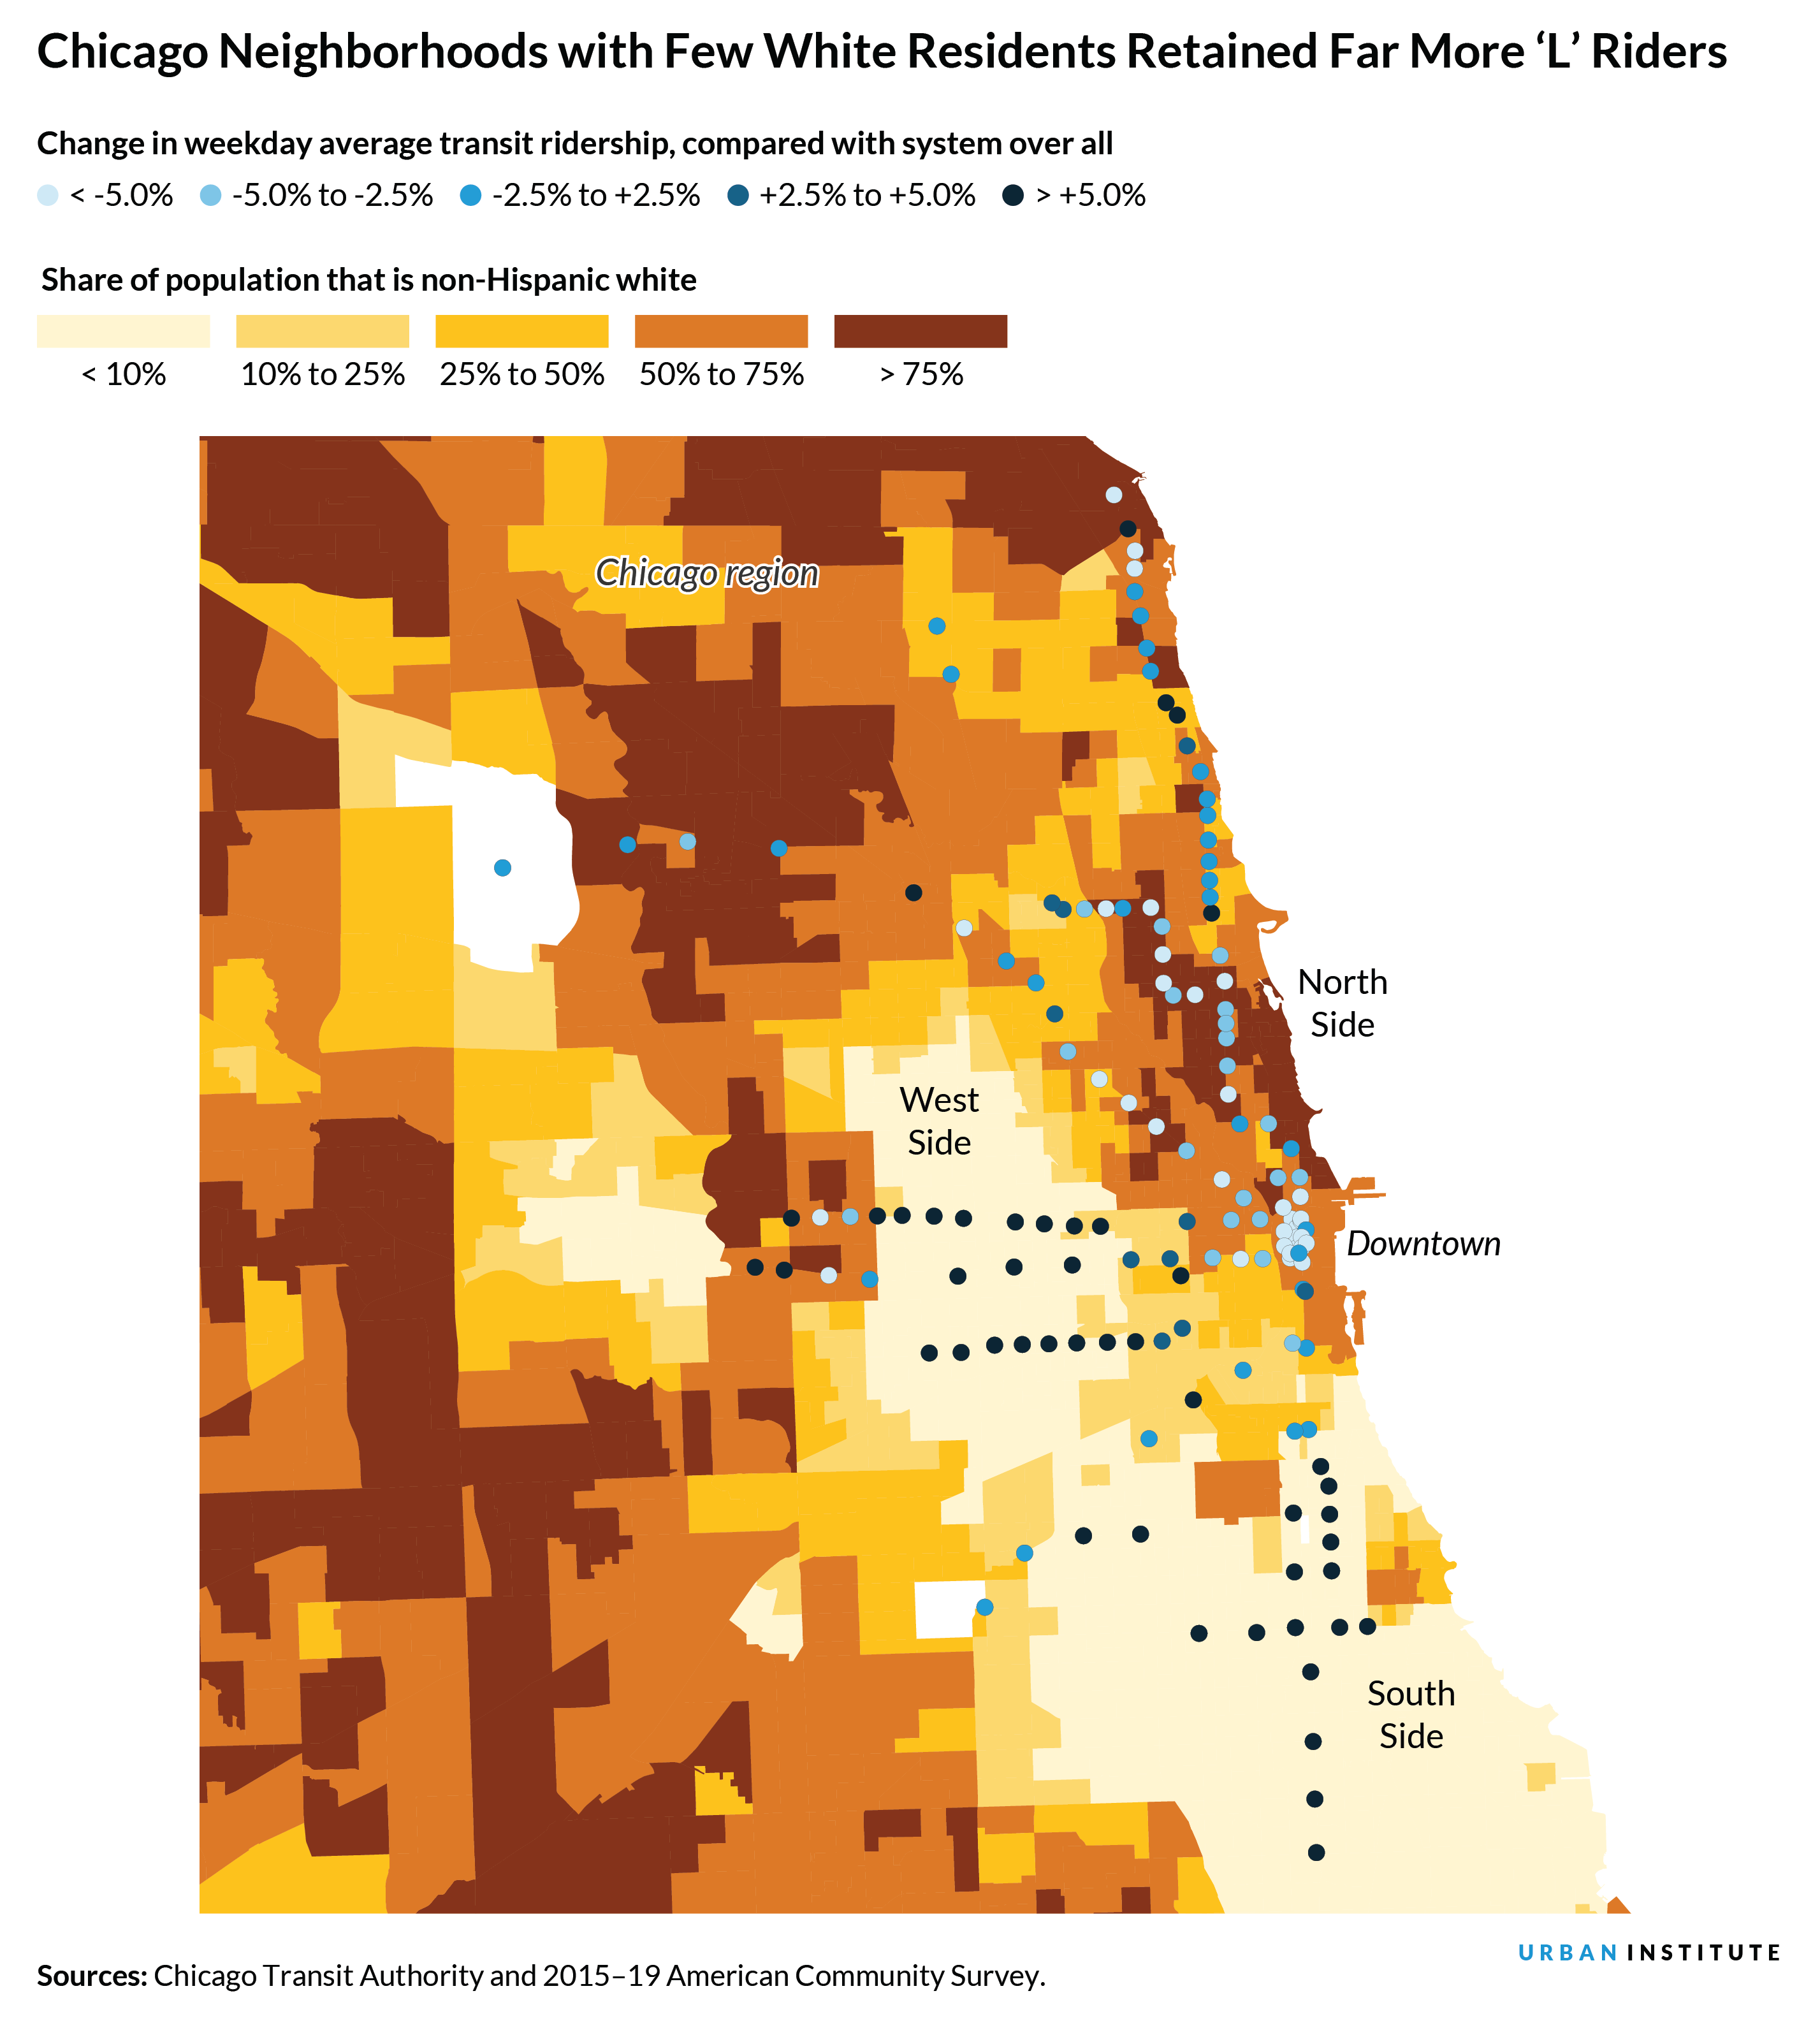 Map of Chicago showing that neighborhoods with few white residents retained more heavy rail riders during the COVID-19 pandemic.